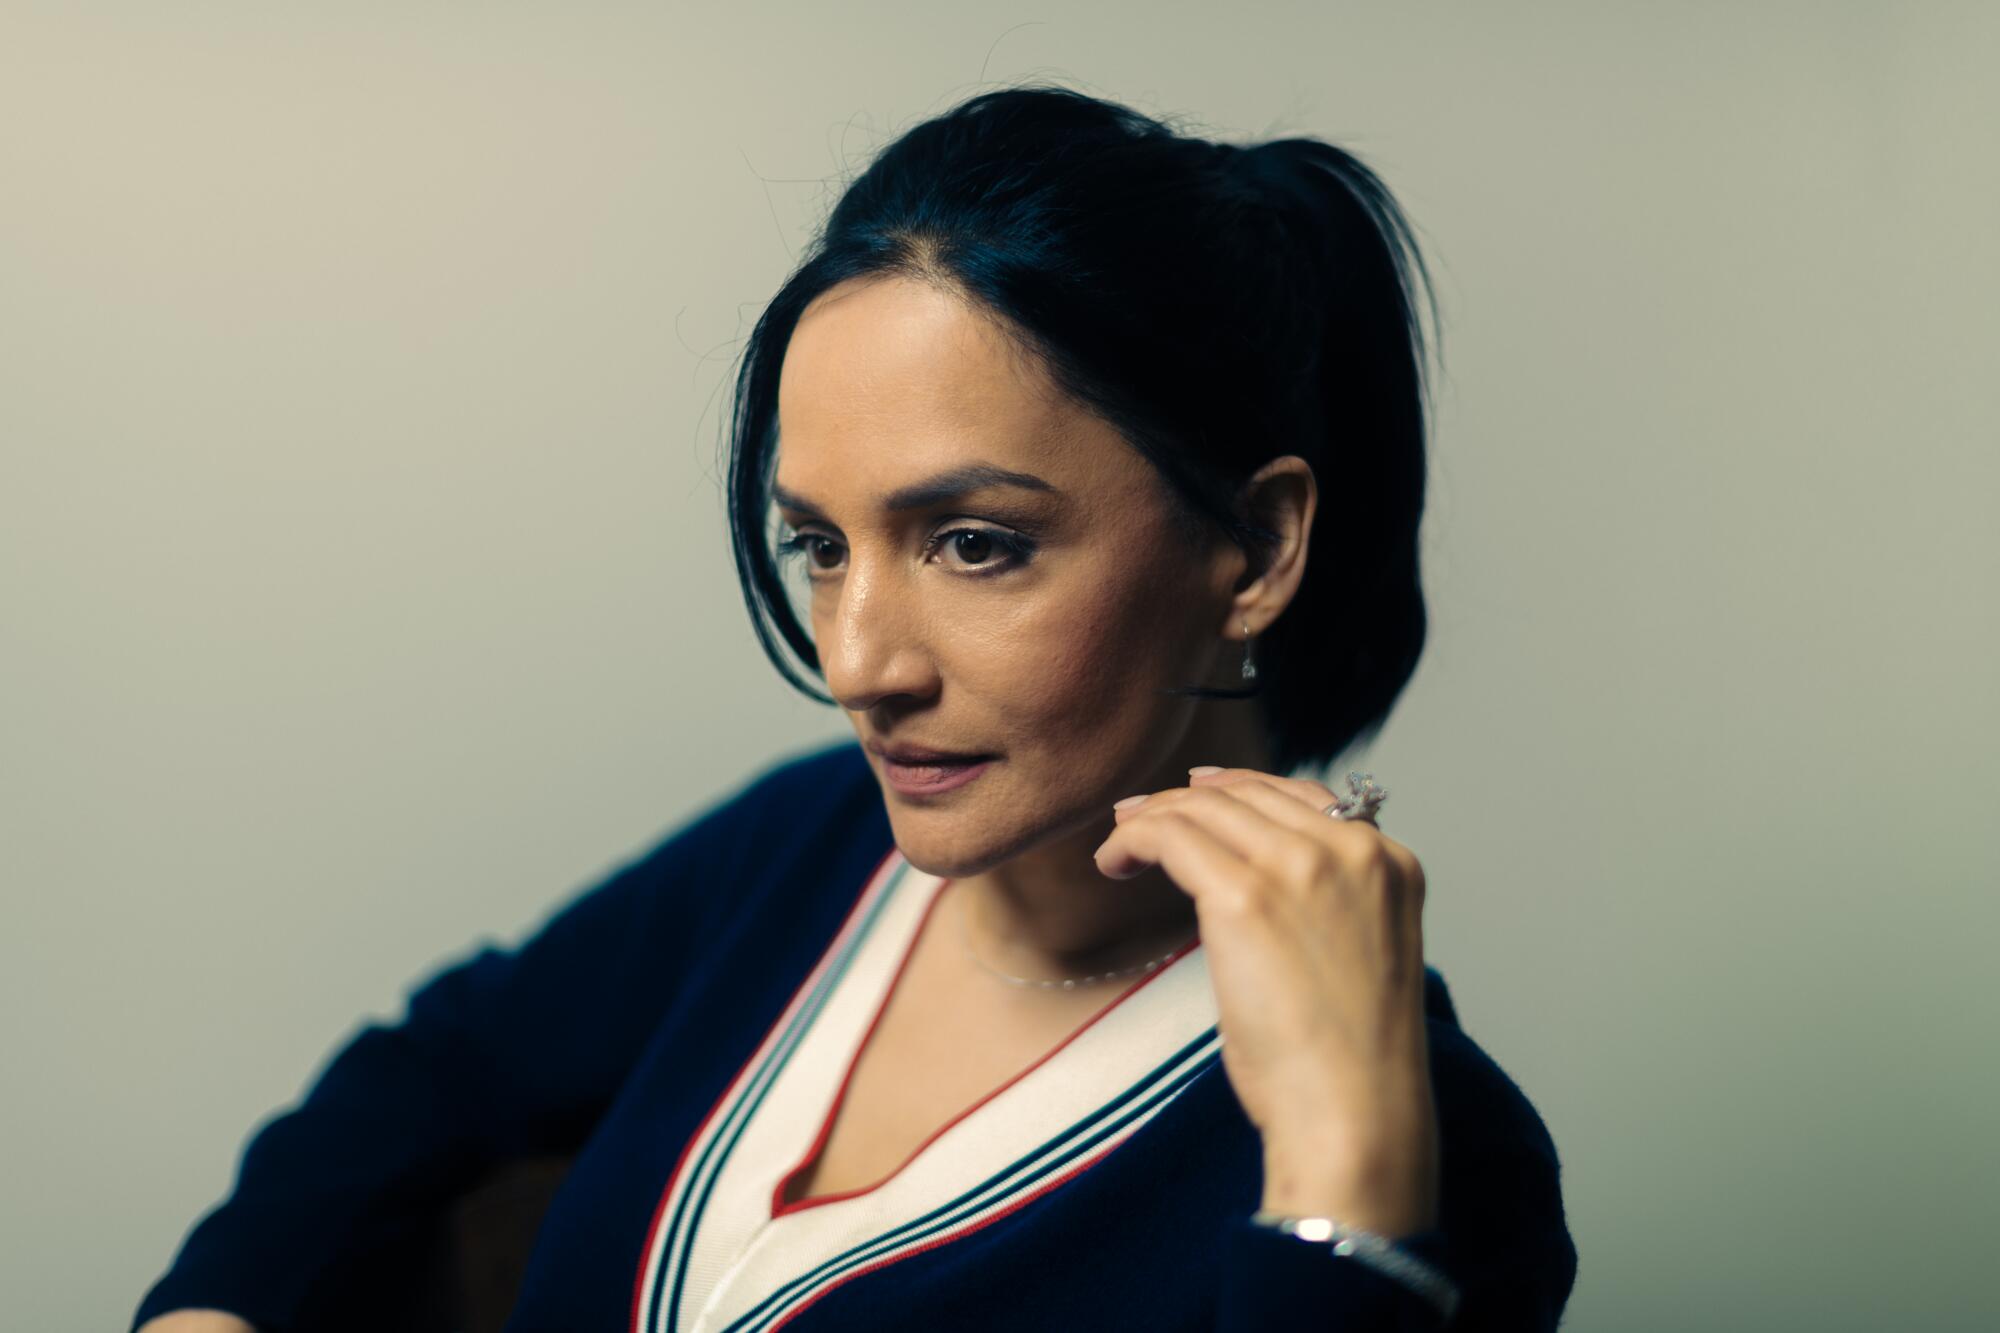 Archie Panjabi, from the shoulders up, in a dark dress with her hand near her face.